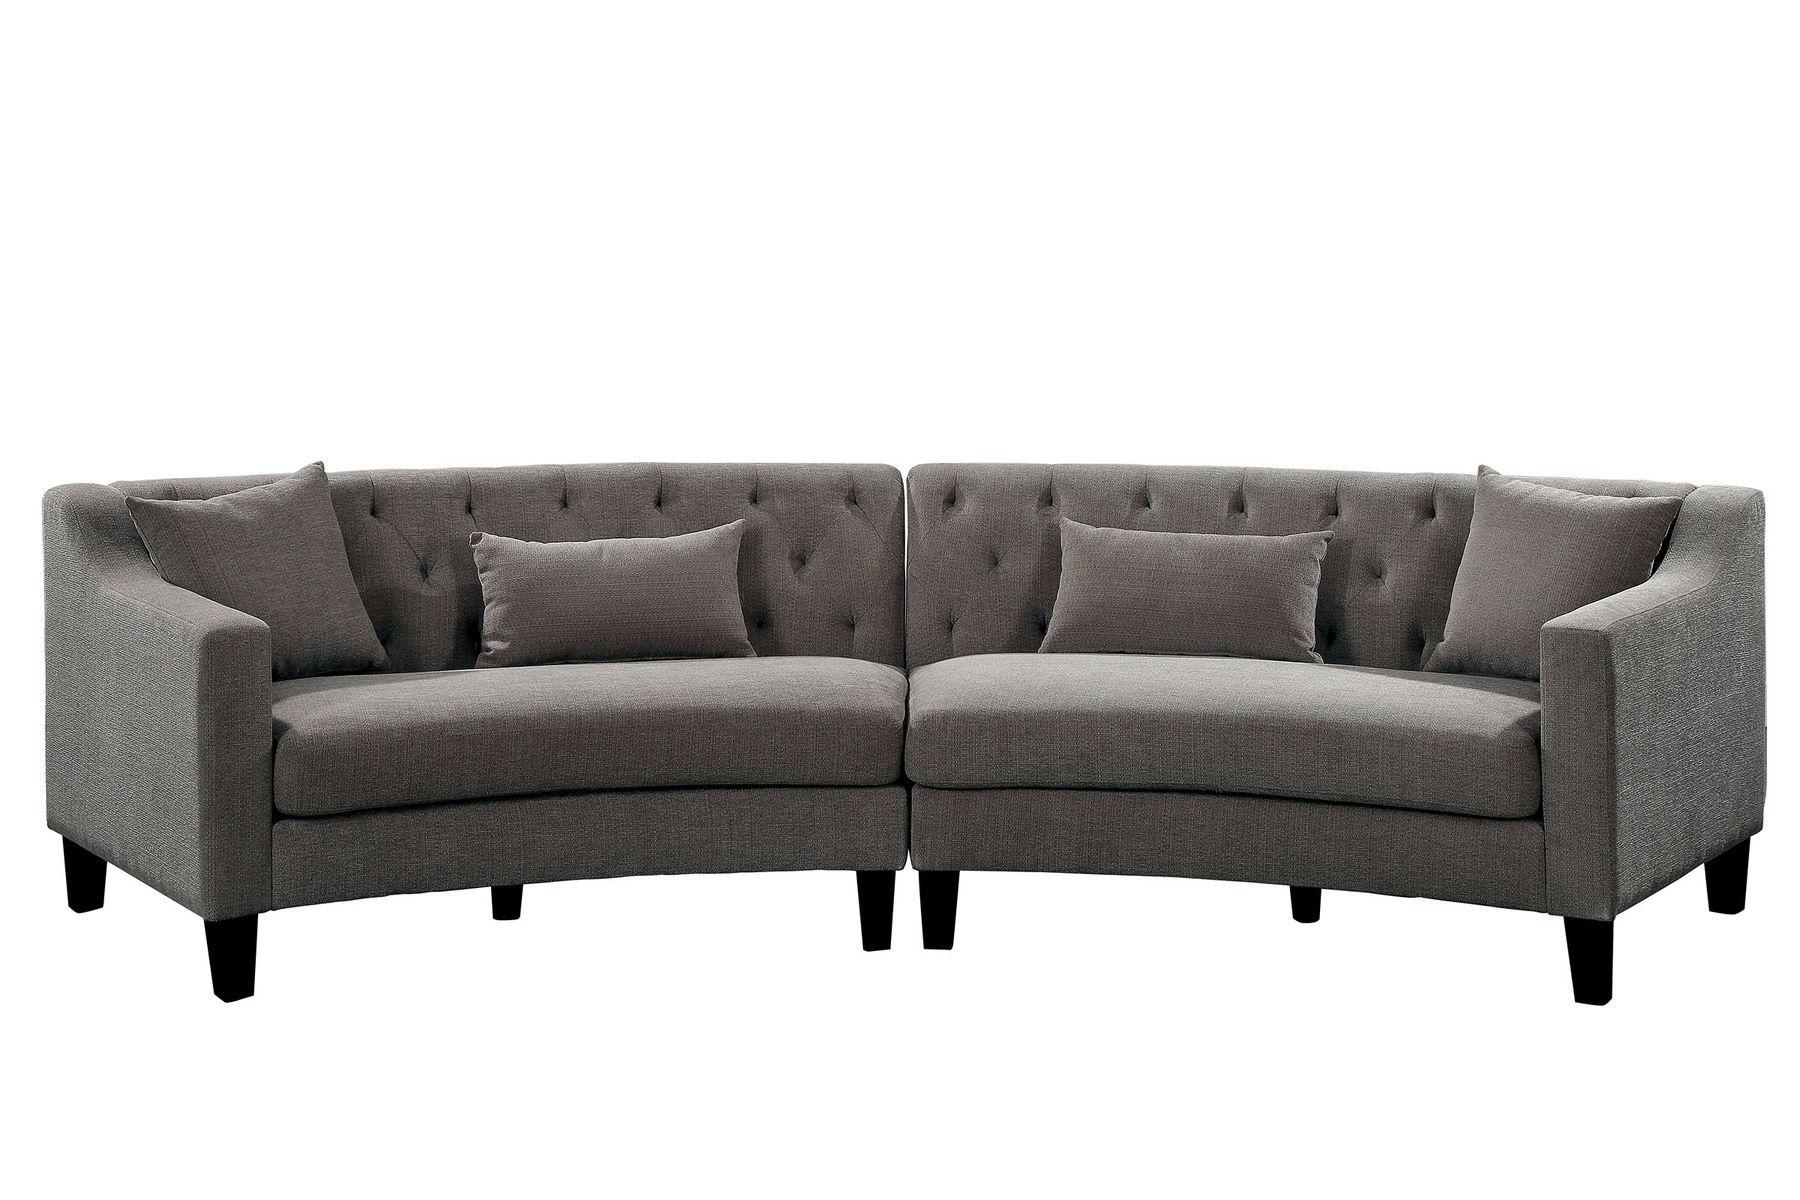 Transitional Sectional Sofa SARIN CM6370 CM6370 in Warm Gray Chenille